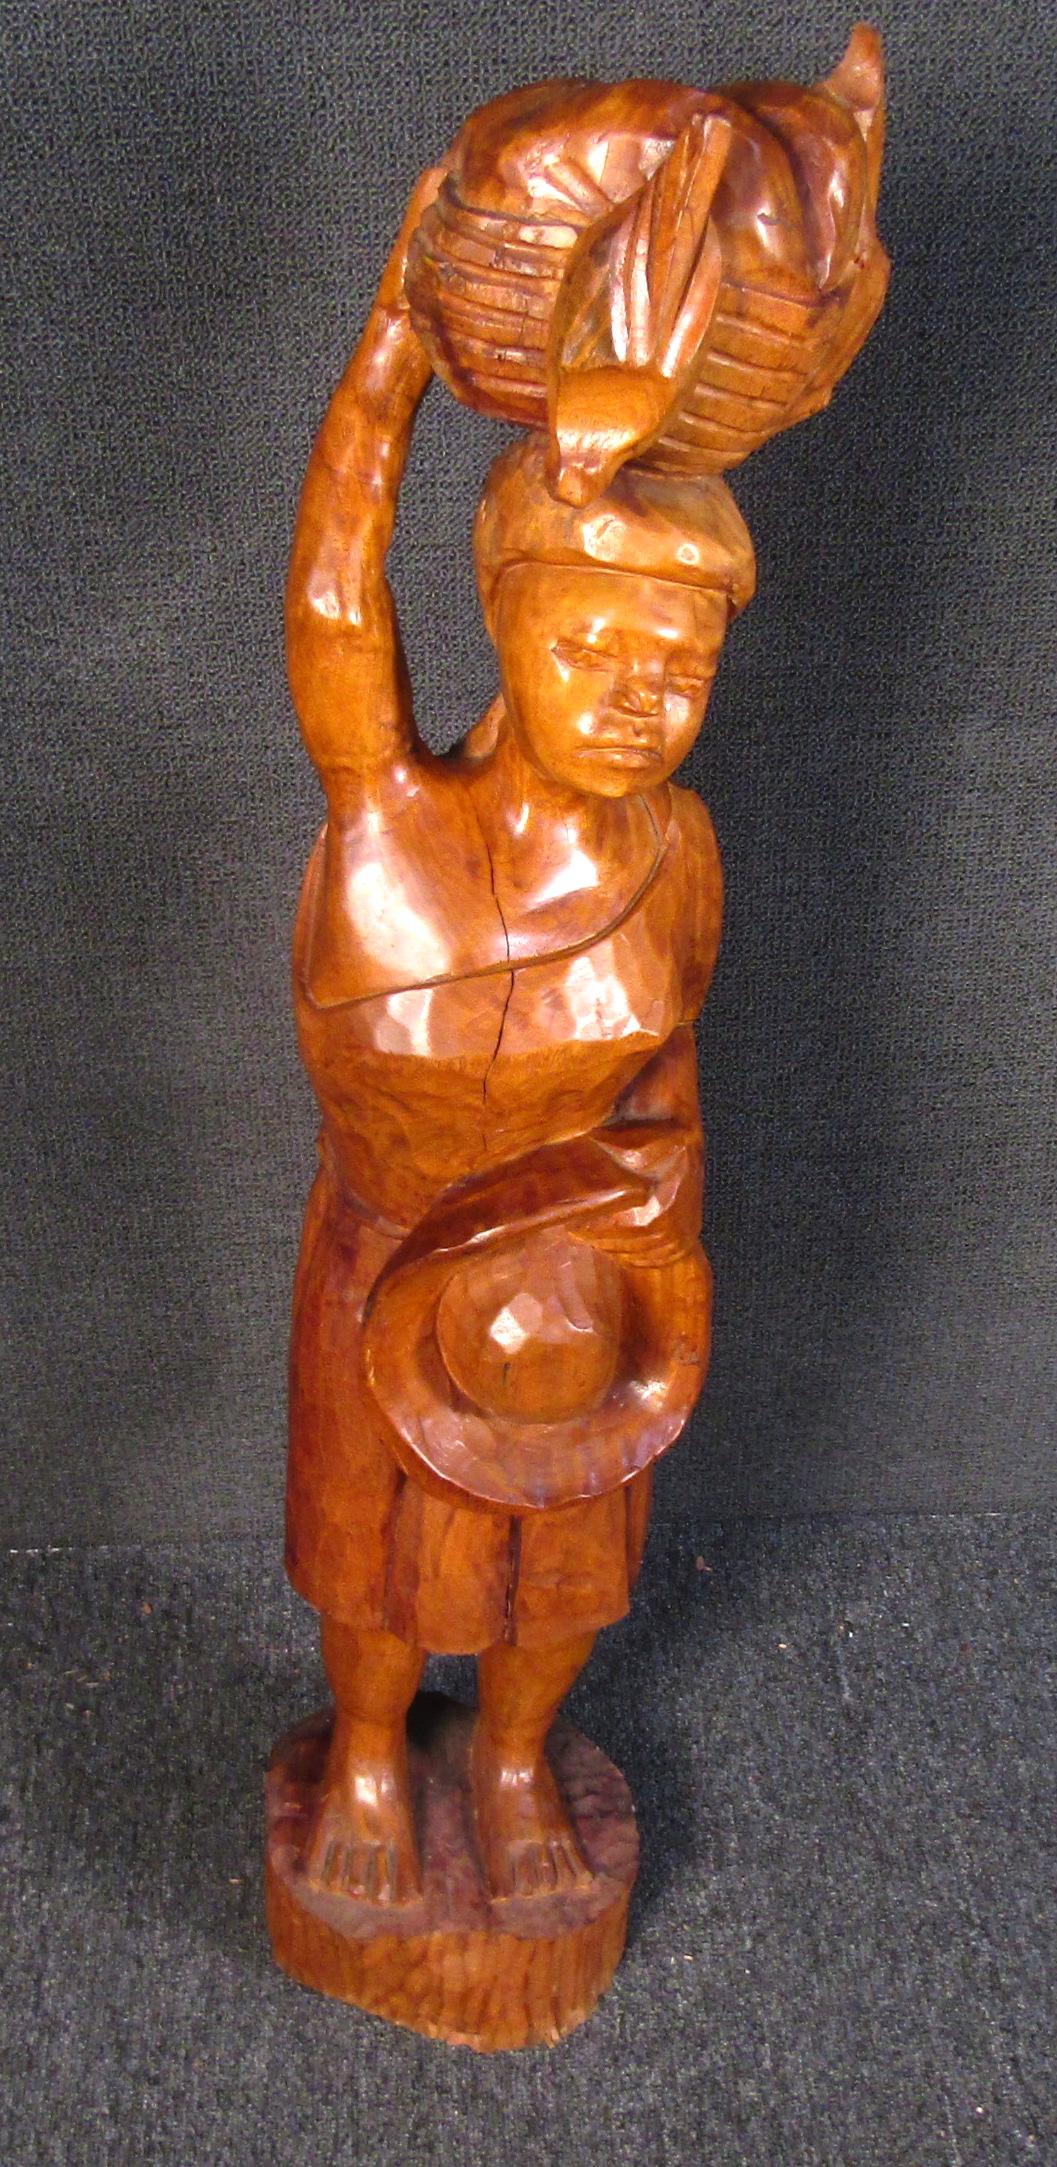 Beautiful one of a kind African carved wooden sculpture of a woman carrying a basket and a hat. Featured in a rich warmly stained wood, this stunning hand carved sculpture will surely be a statement piece among any collection of art.

Please confirm